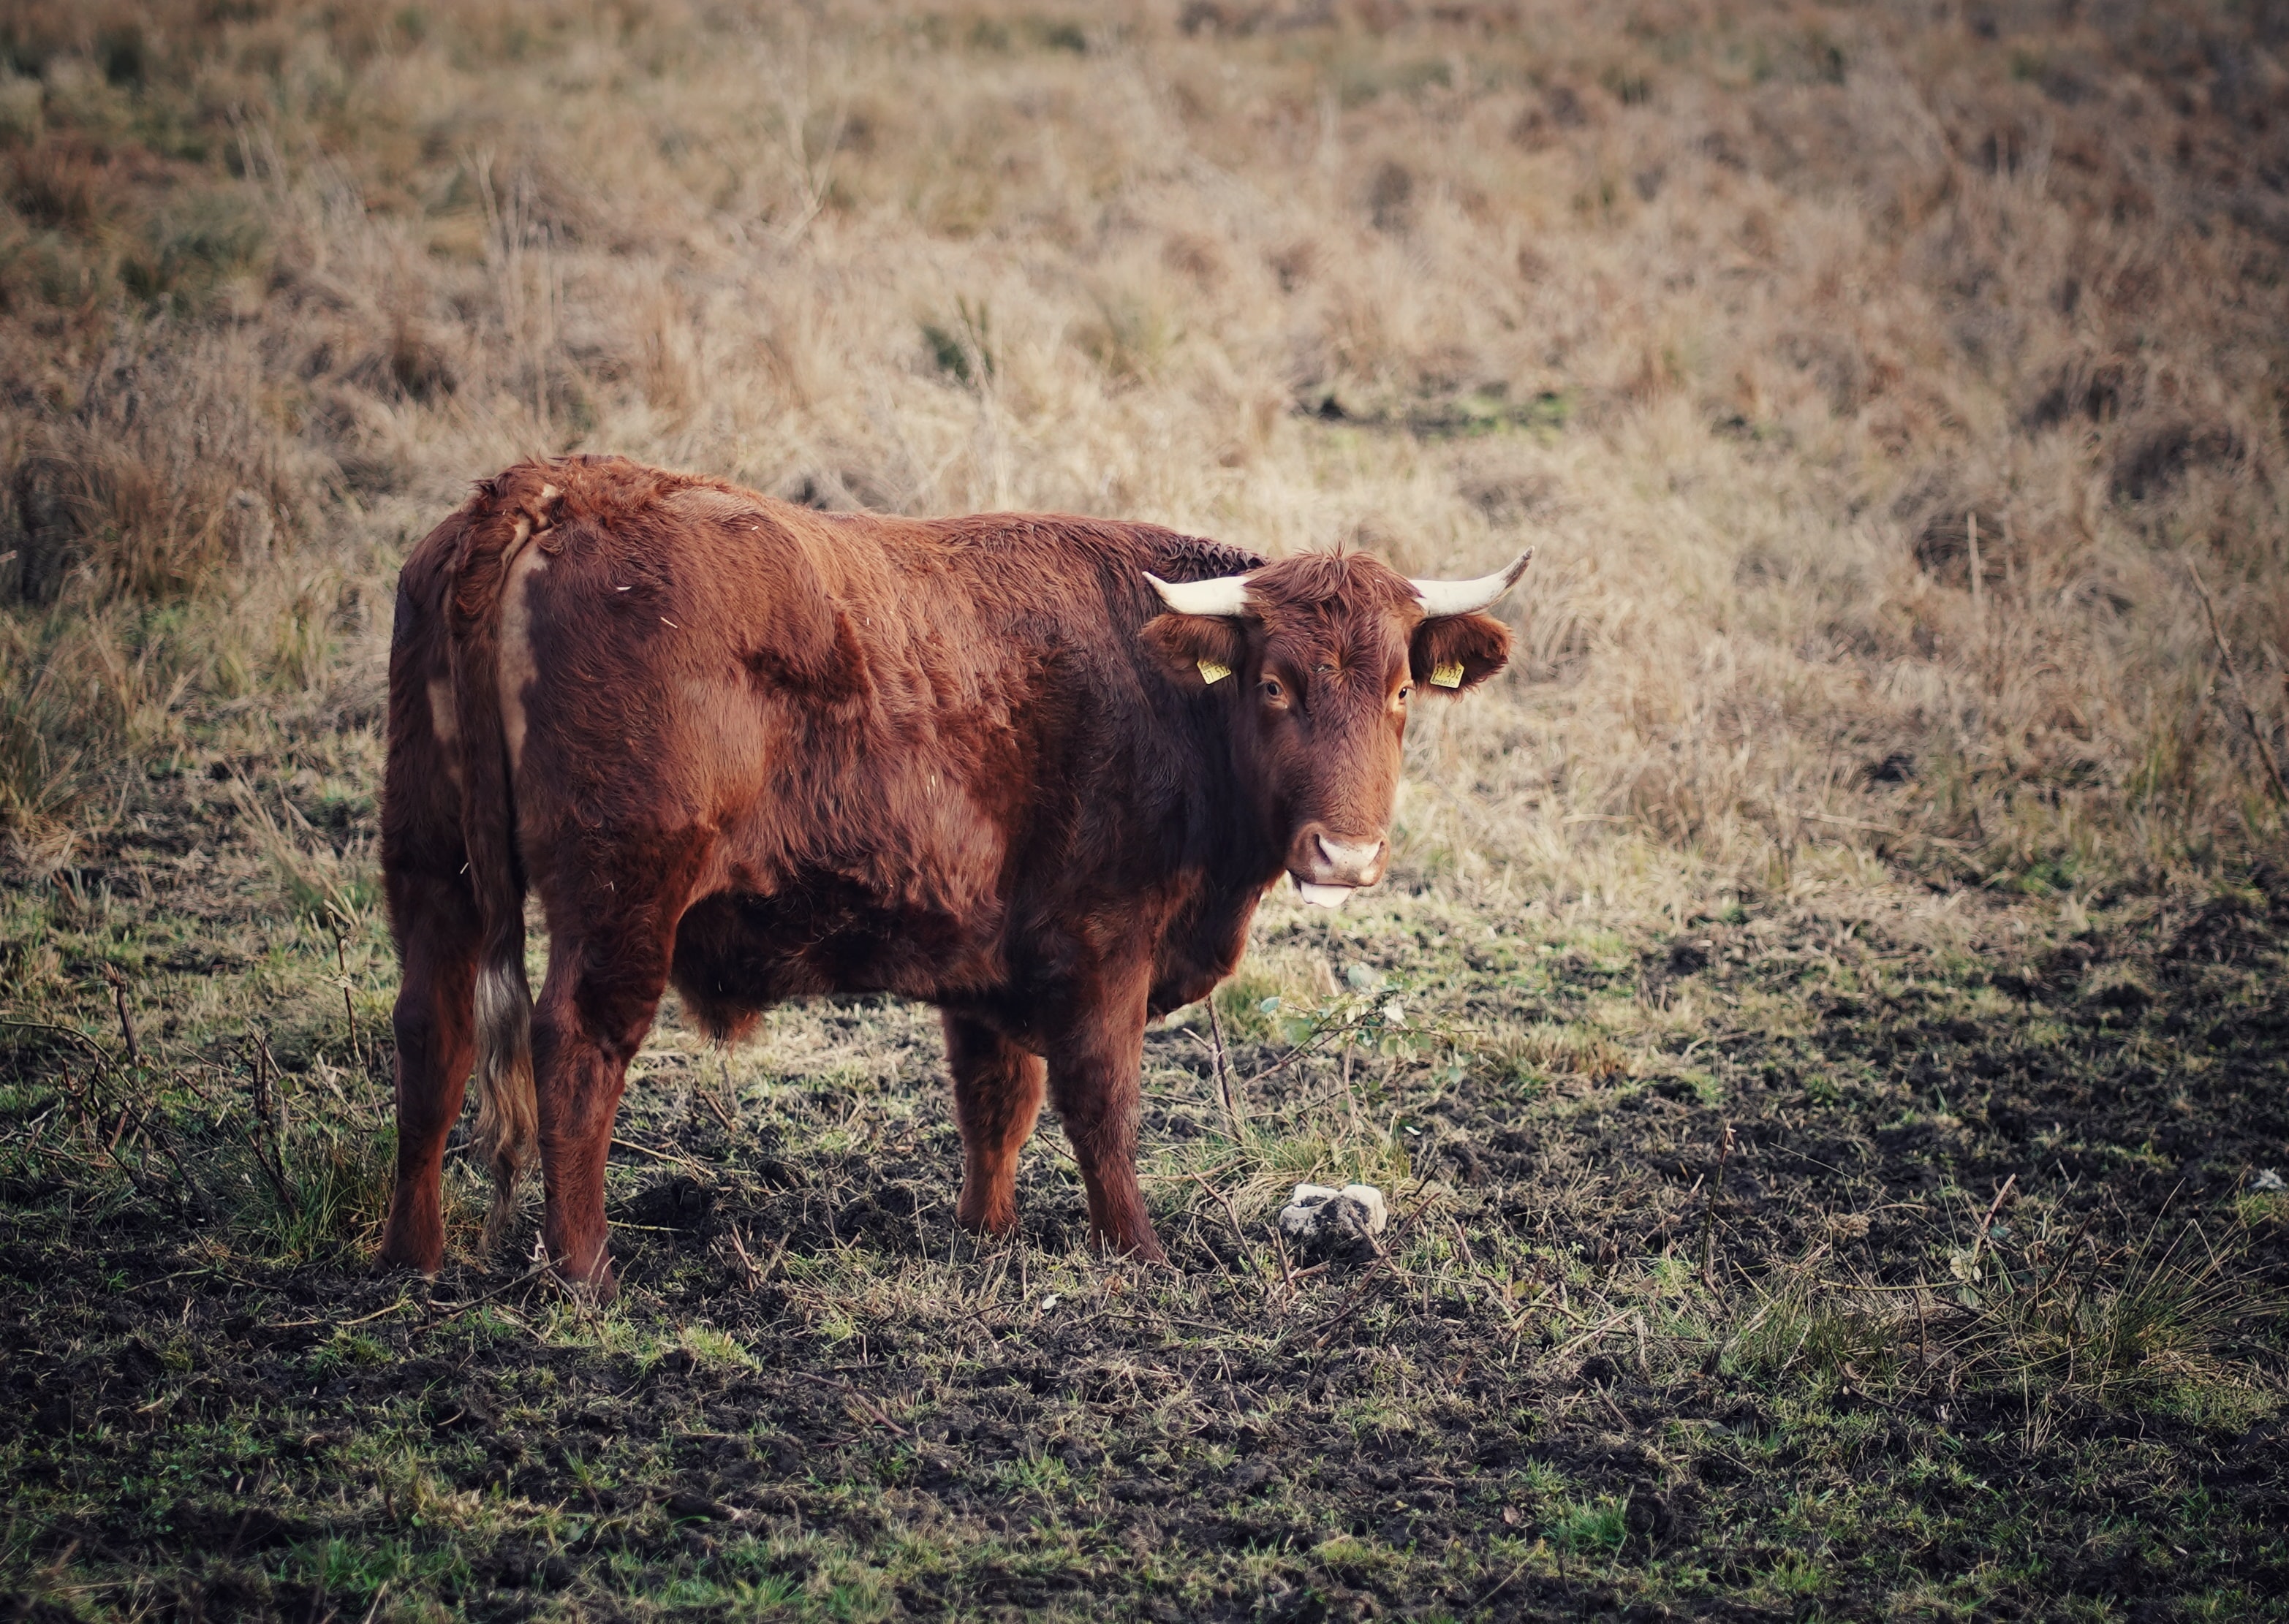 a brown cow standing alone in a grassy patch